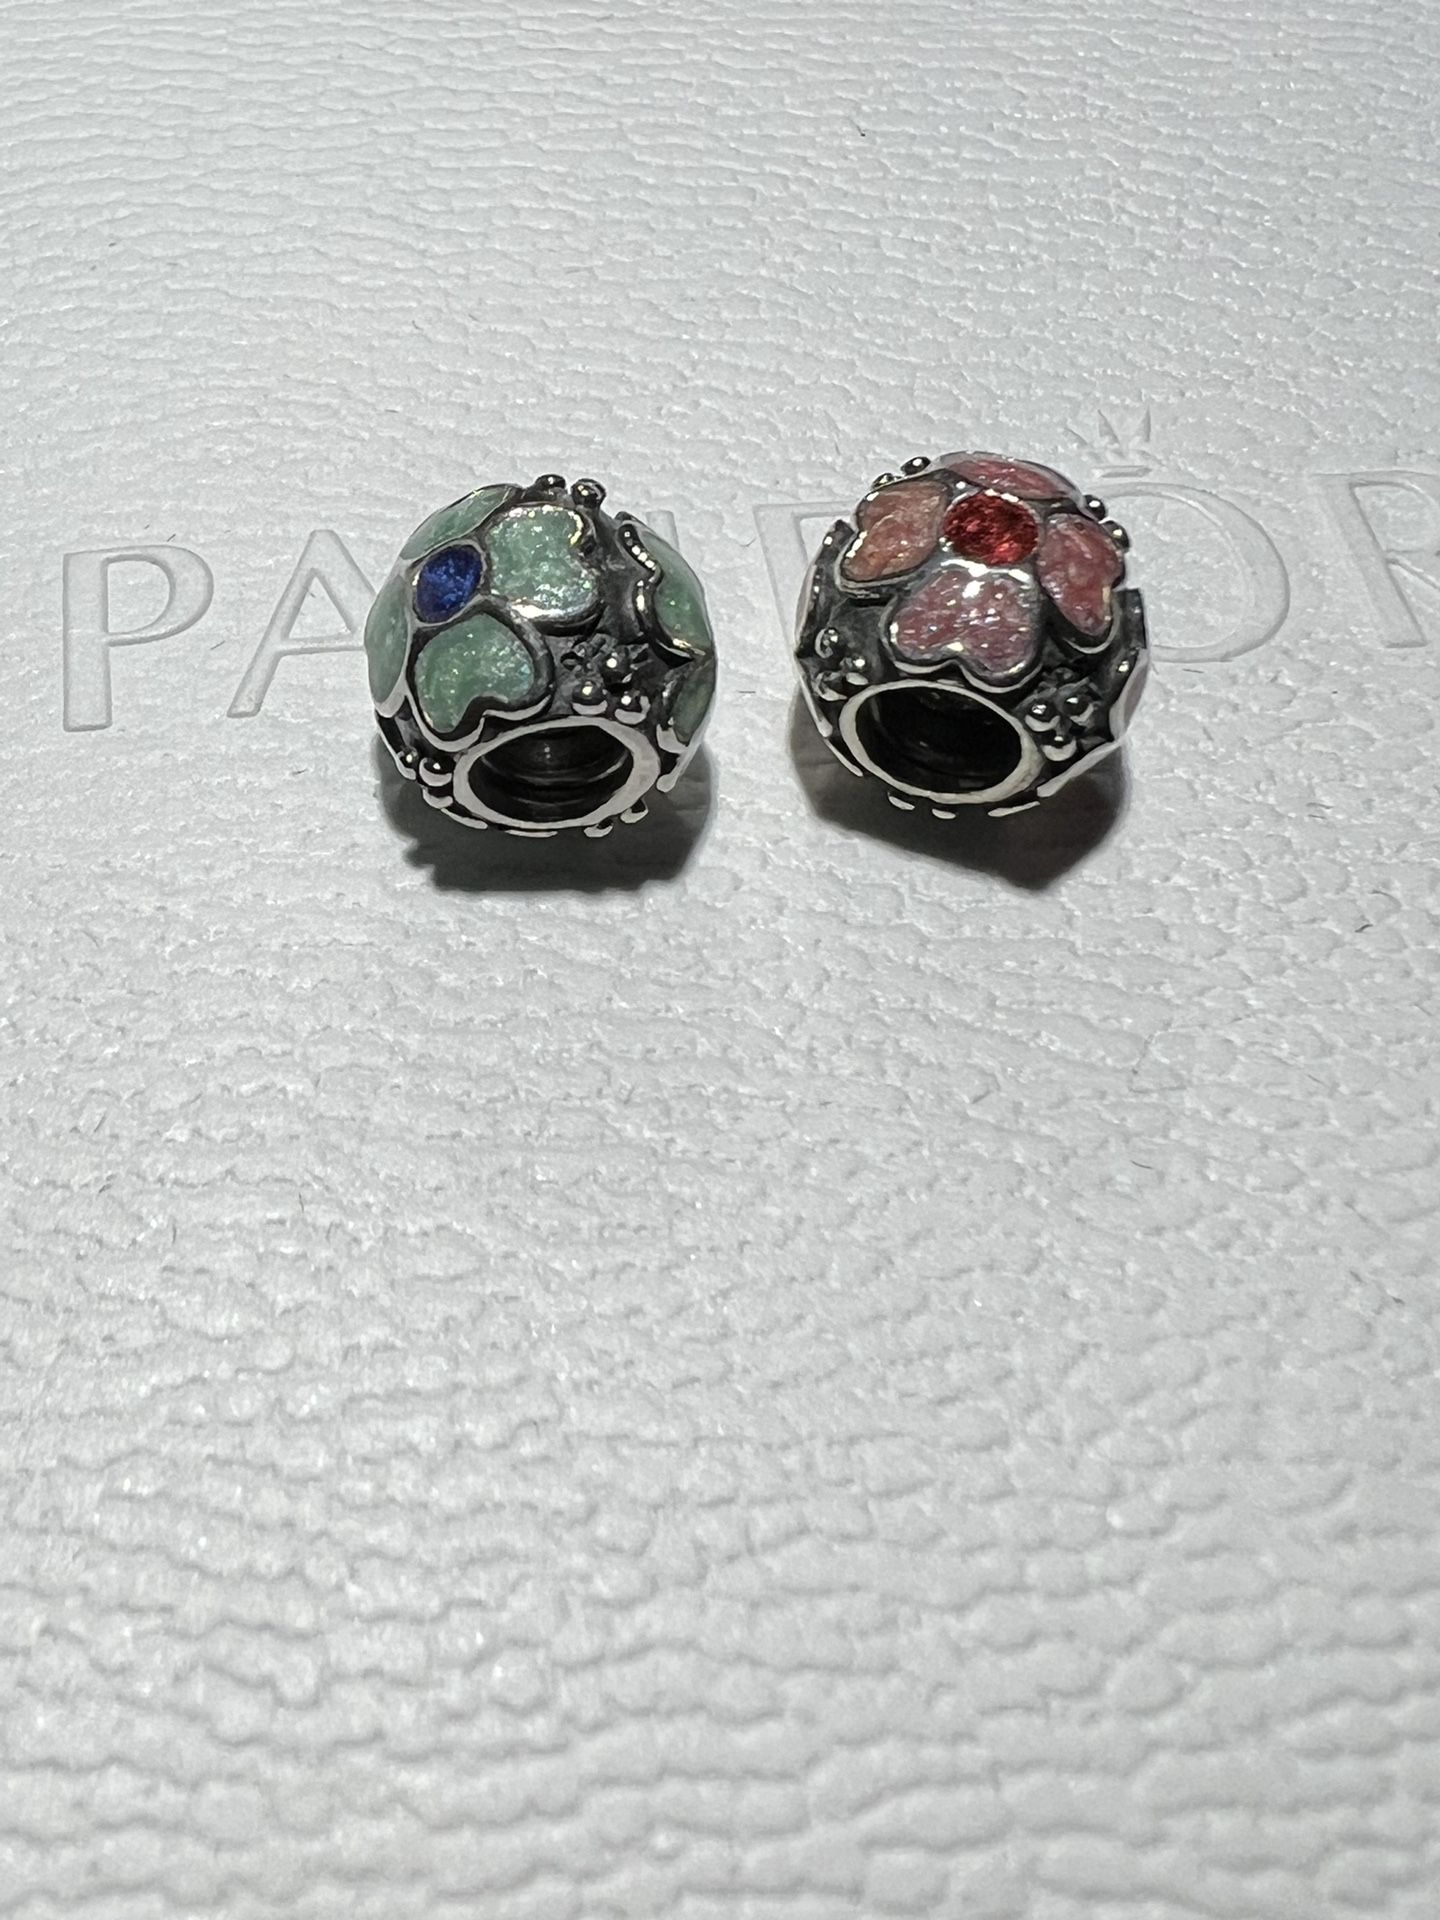 AUTHENTIC STERLING SILVER PANDORA CHARMS EACH $22